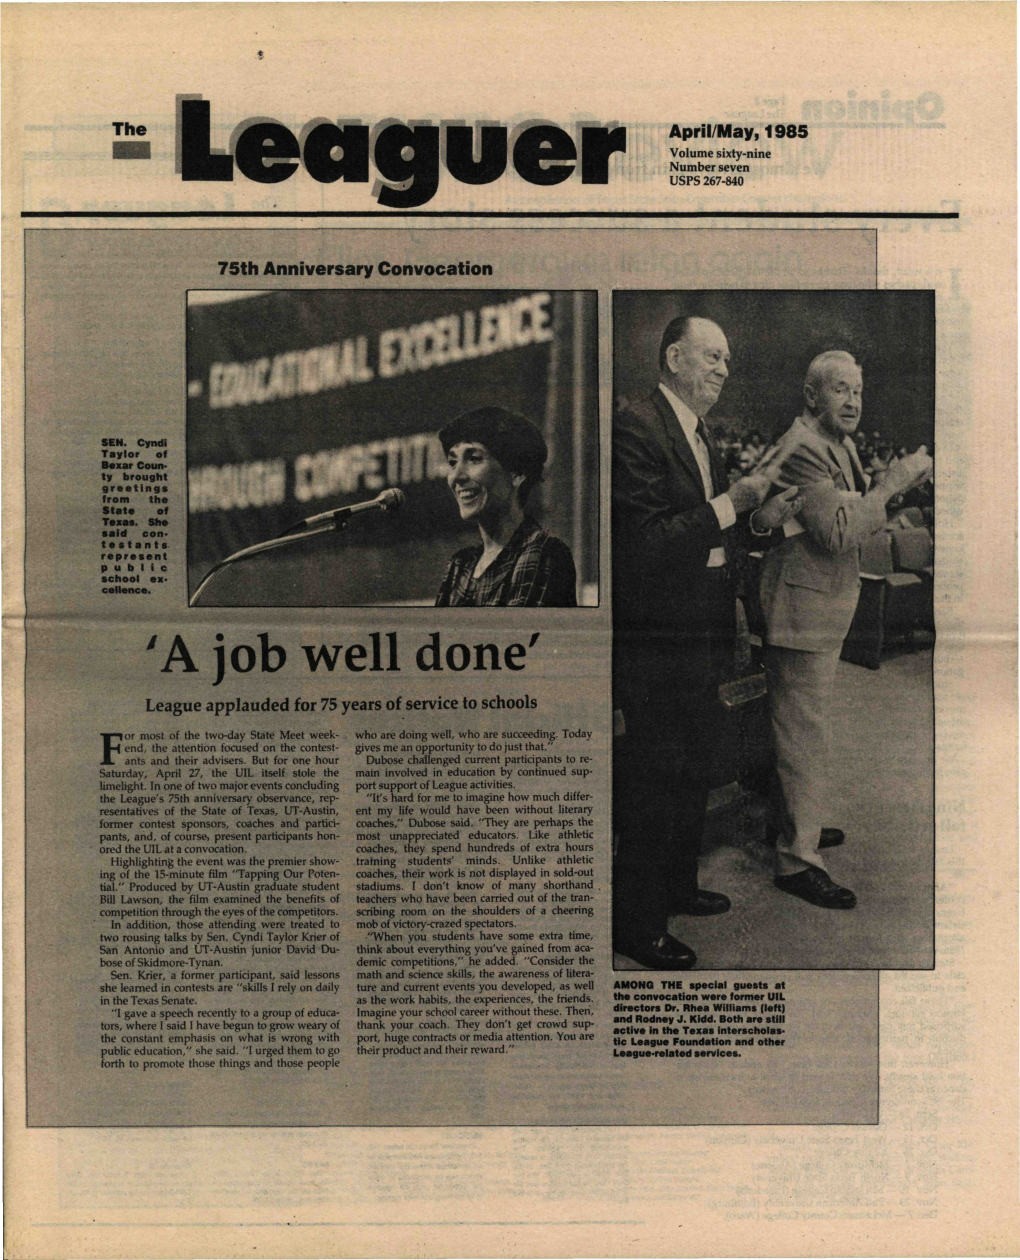 The Leaguer, April/May 1985